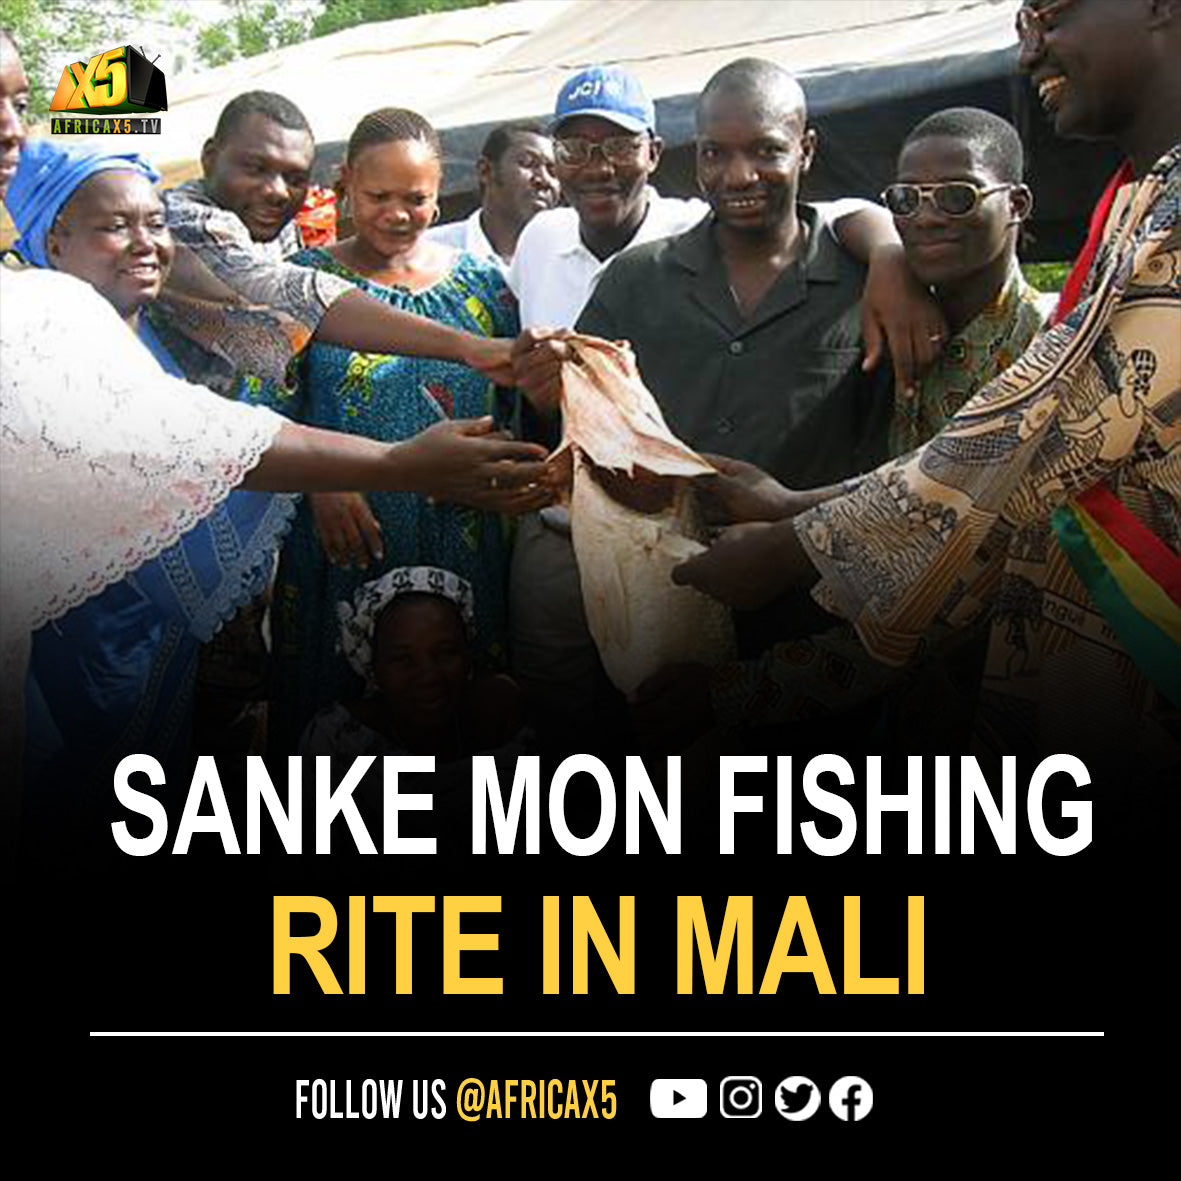 The Sanké mon collective fishing rite takes place in San in the Ségou region of Mali every second Thursday of the seventh lunar month to commemorate the founding of the town.